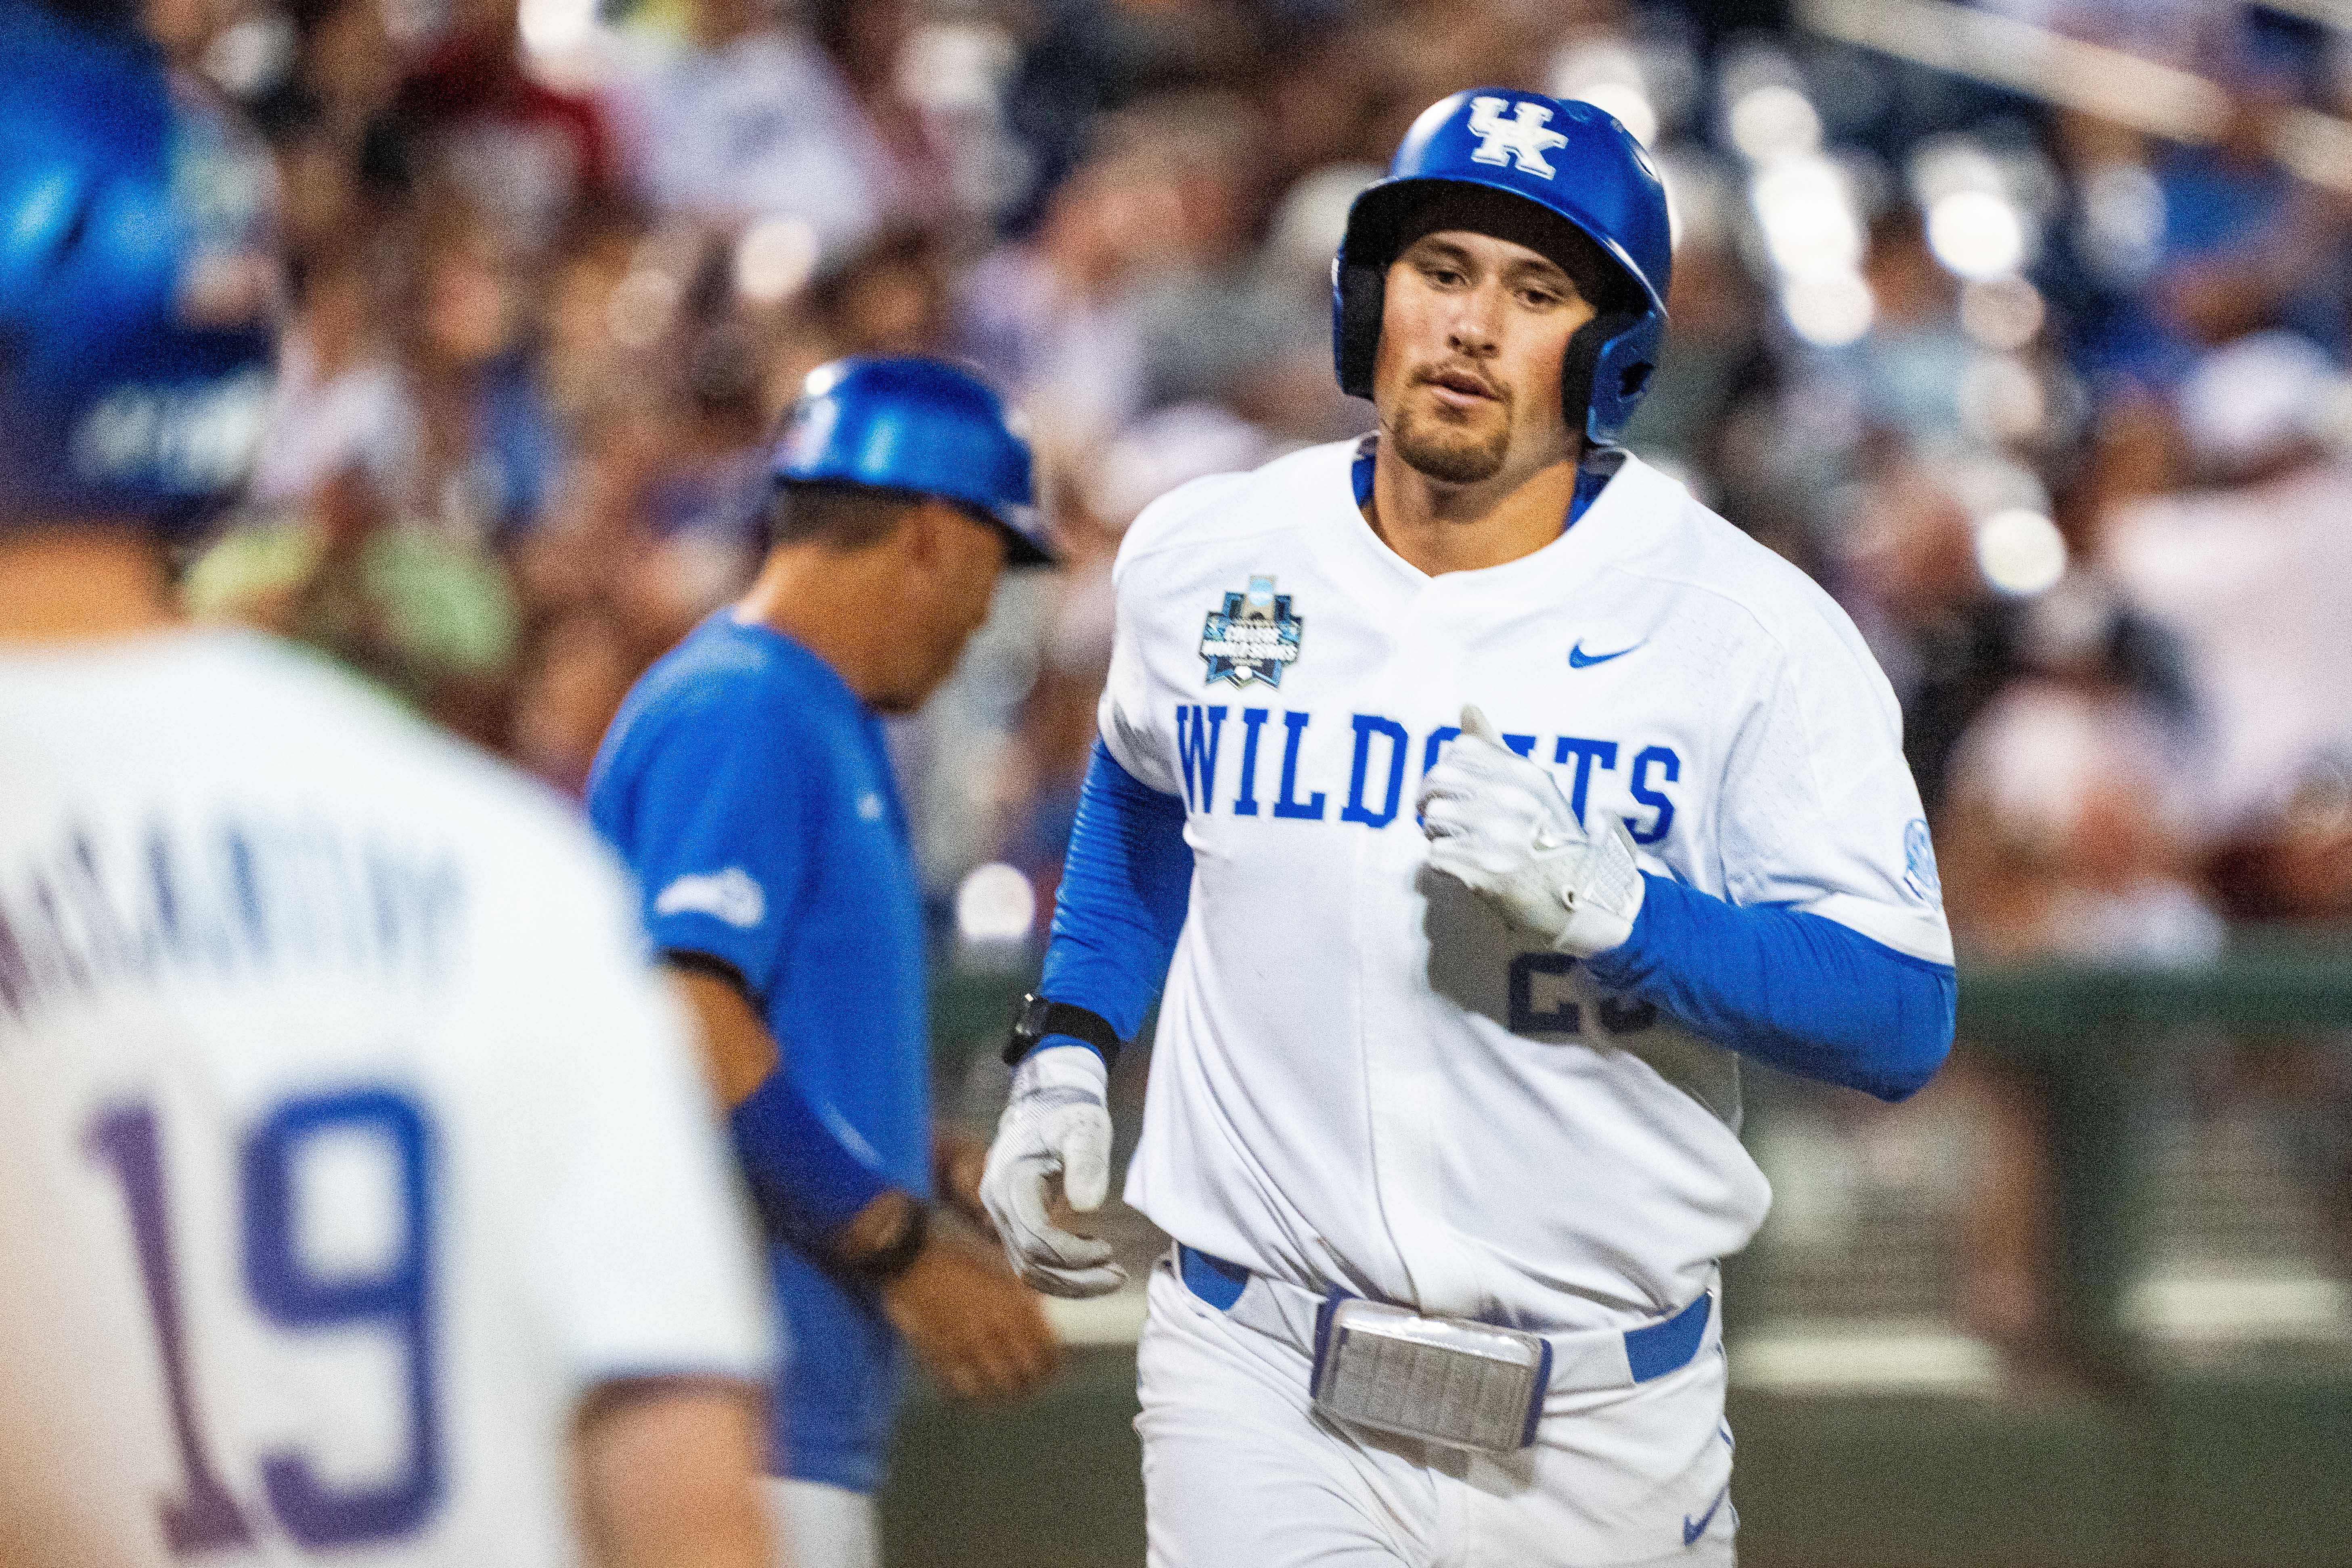 Ryan Nicholson scored the only run for Kentucky against Texas A&amp;M. on Monday. He smacked a home run in the ninth inning off relief pitcher Josh Stewart.